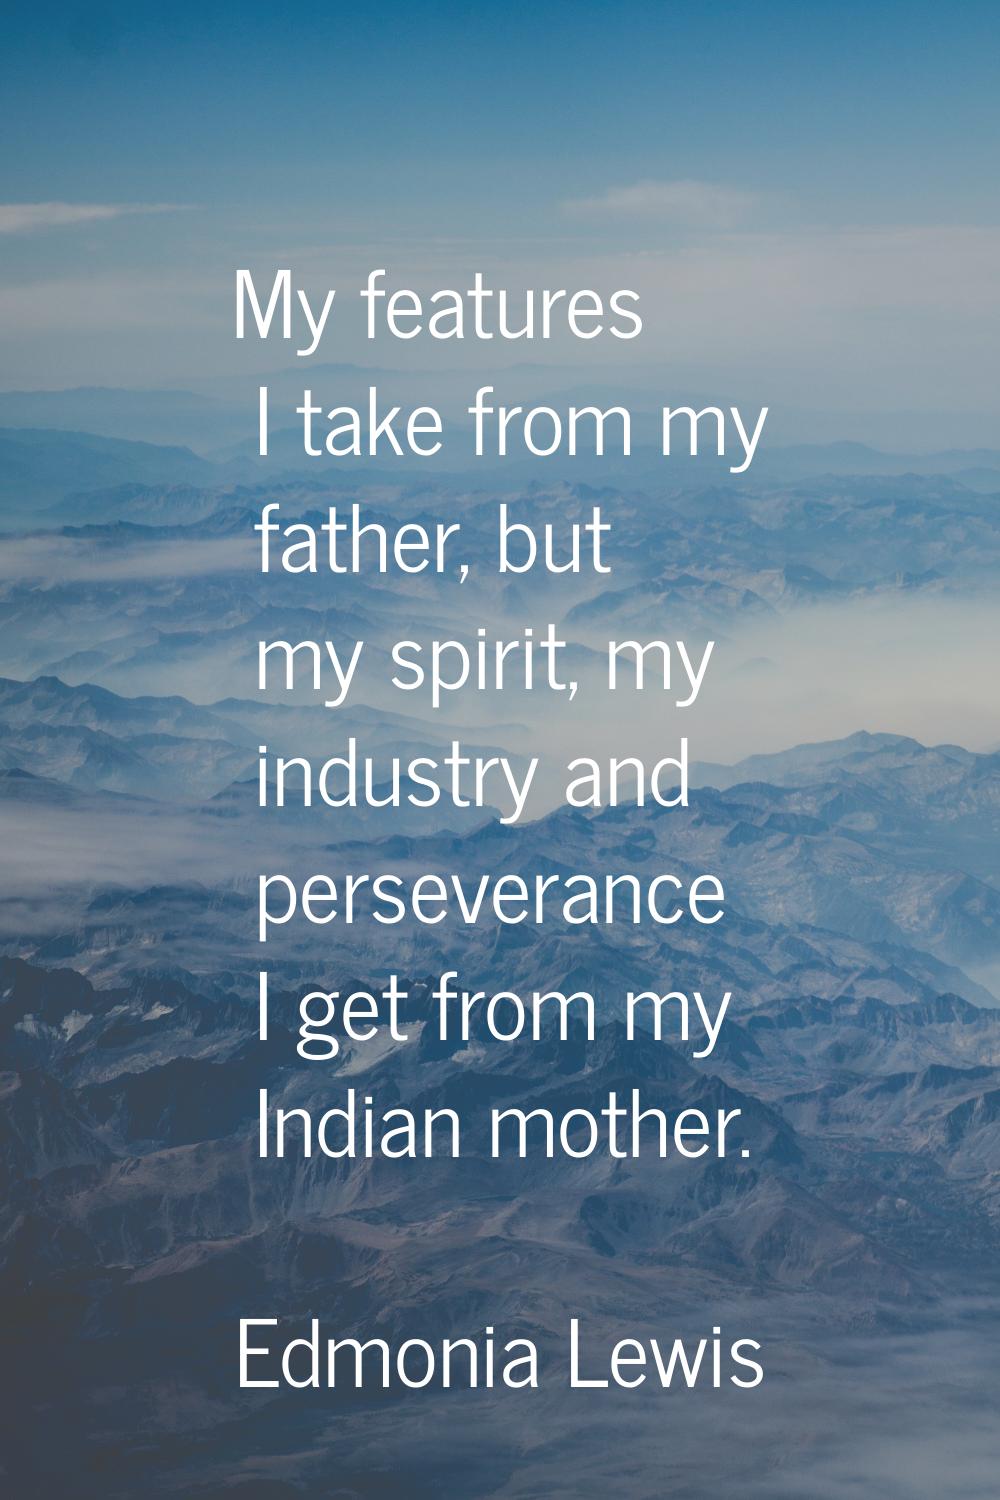 My features I take from my father, but my spirit, my industry and perseverance I get from my Indian